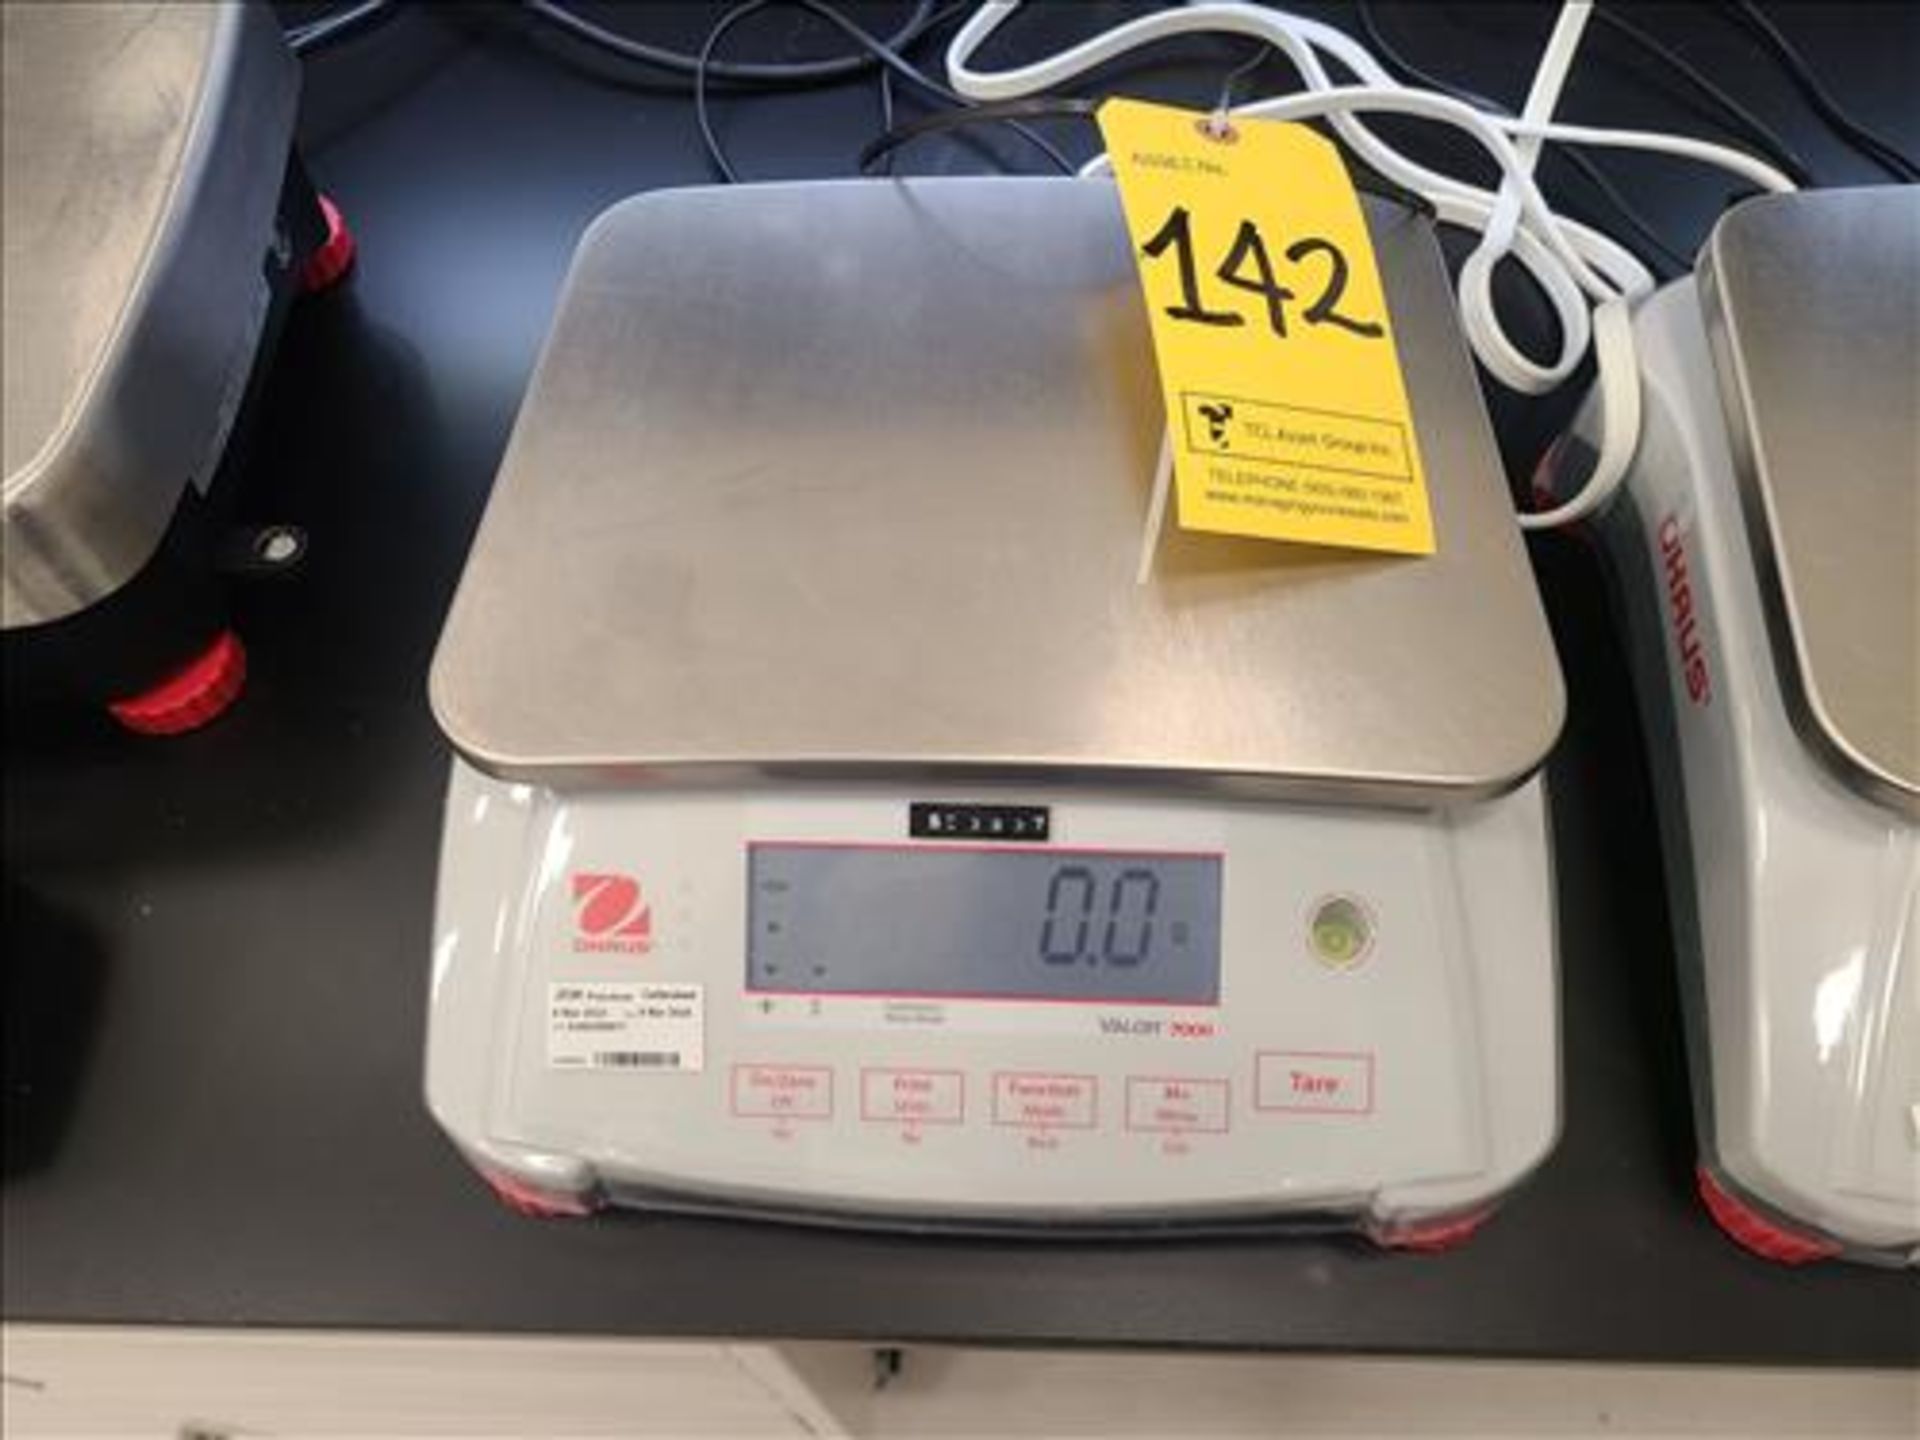 Ohaus Valour 7000 digital scale, mod. V71P6T, 9 in. x 11 in. platform, 6000 g cap. [Loc. Packaging